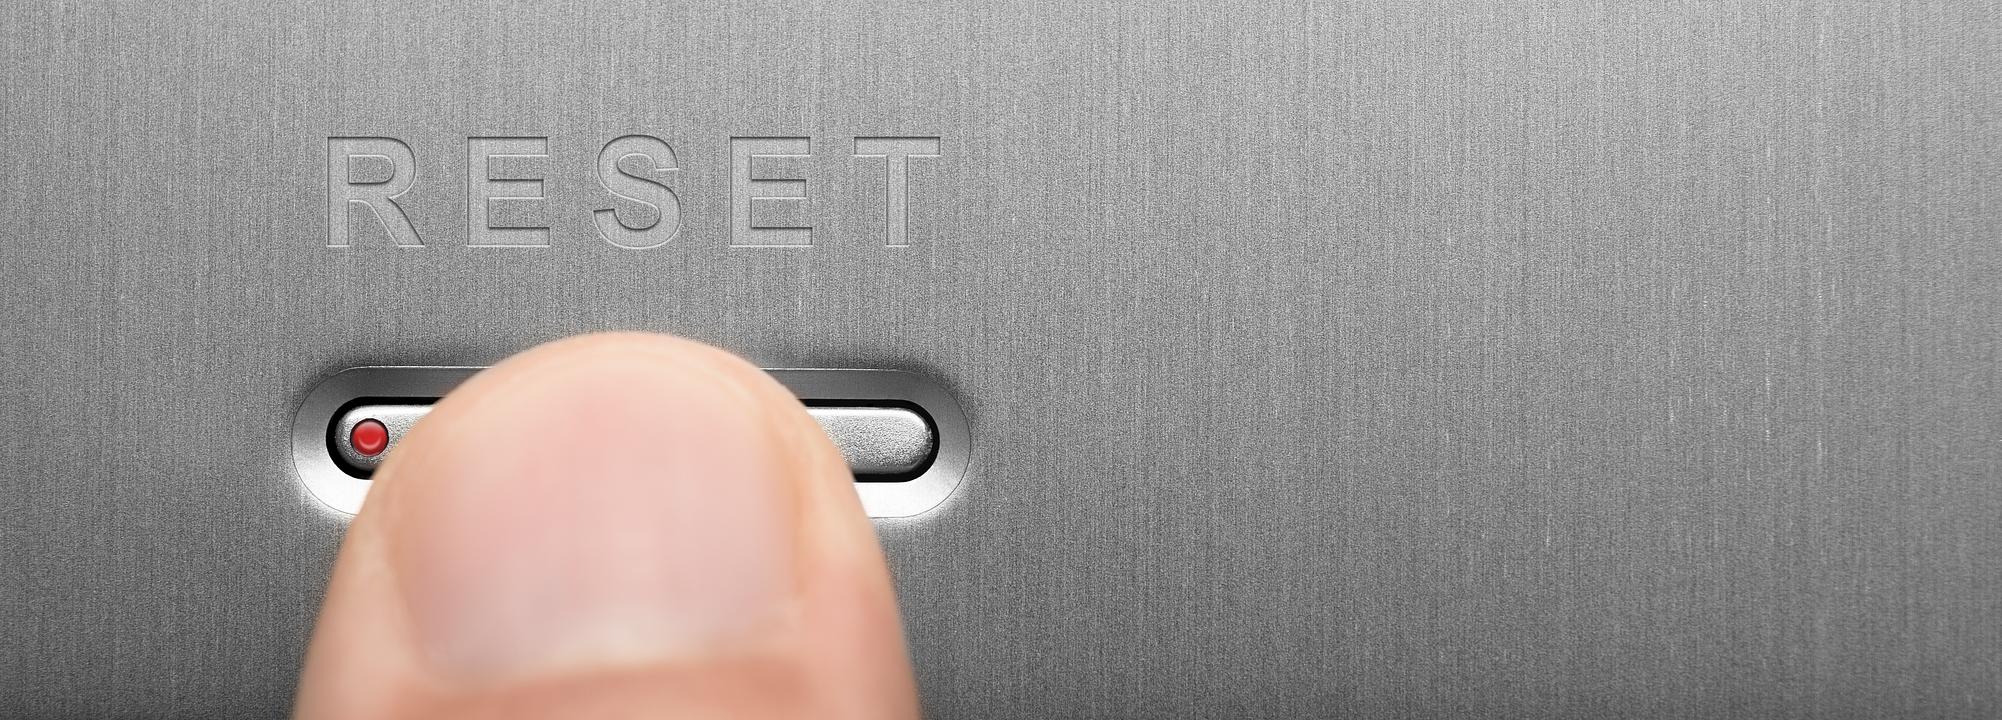 A finger on a "Reset" button